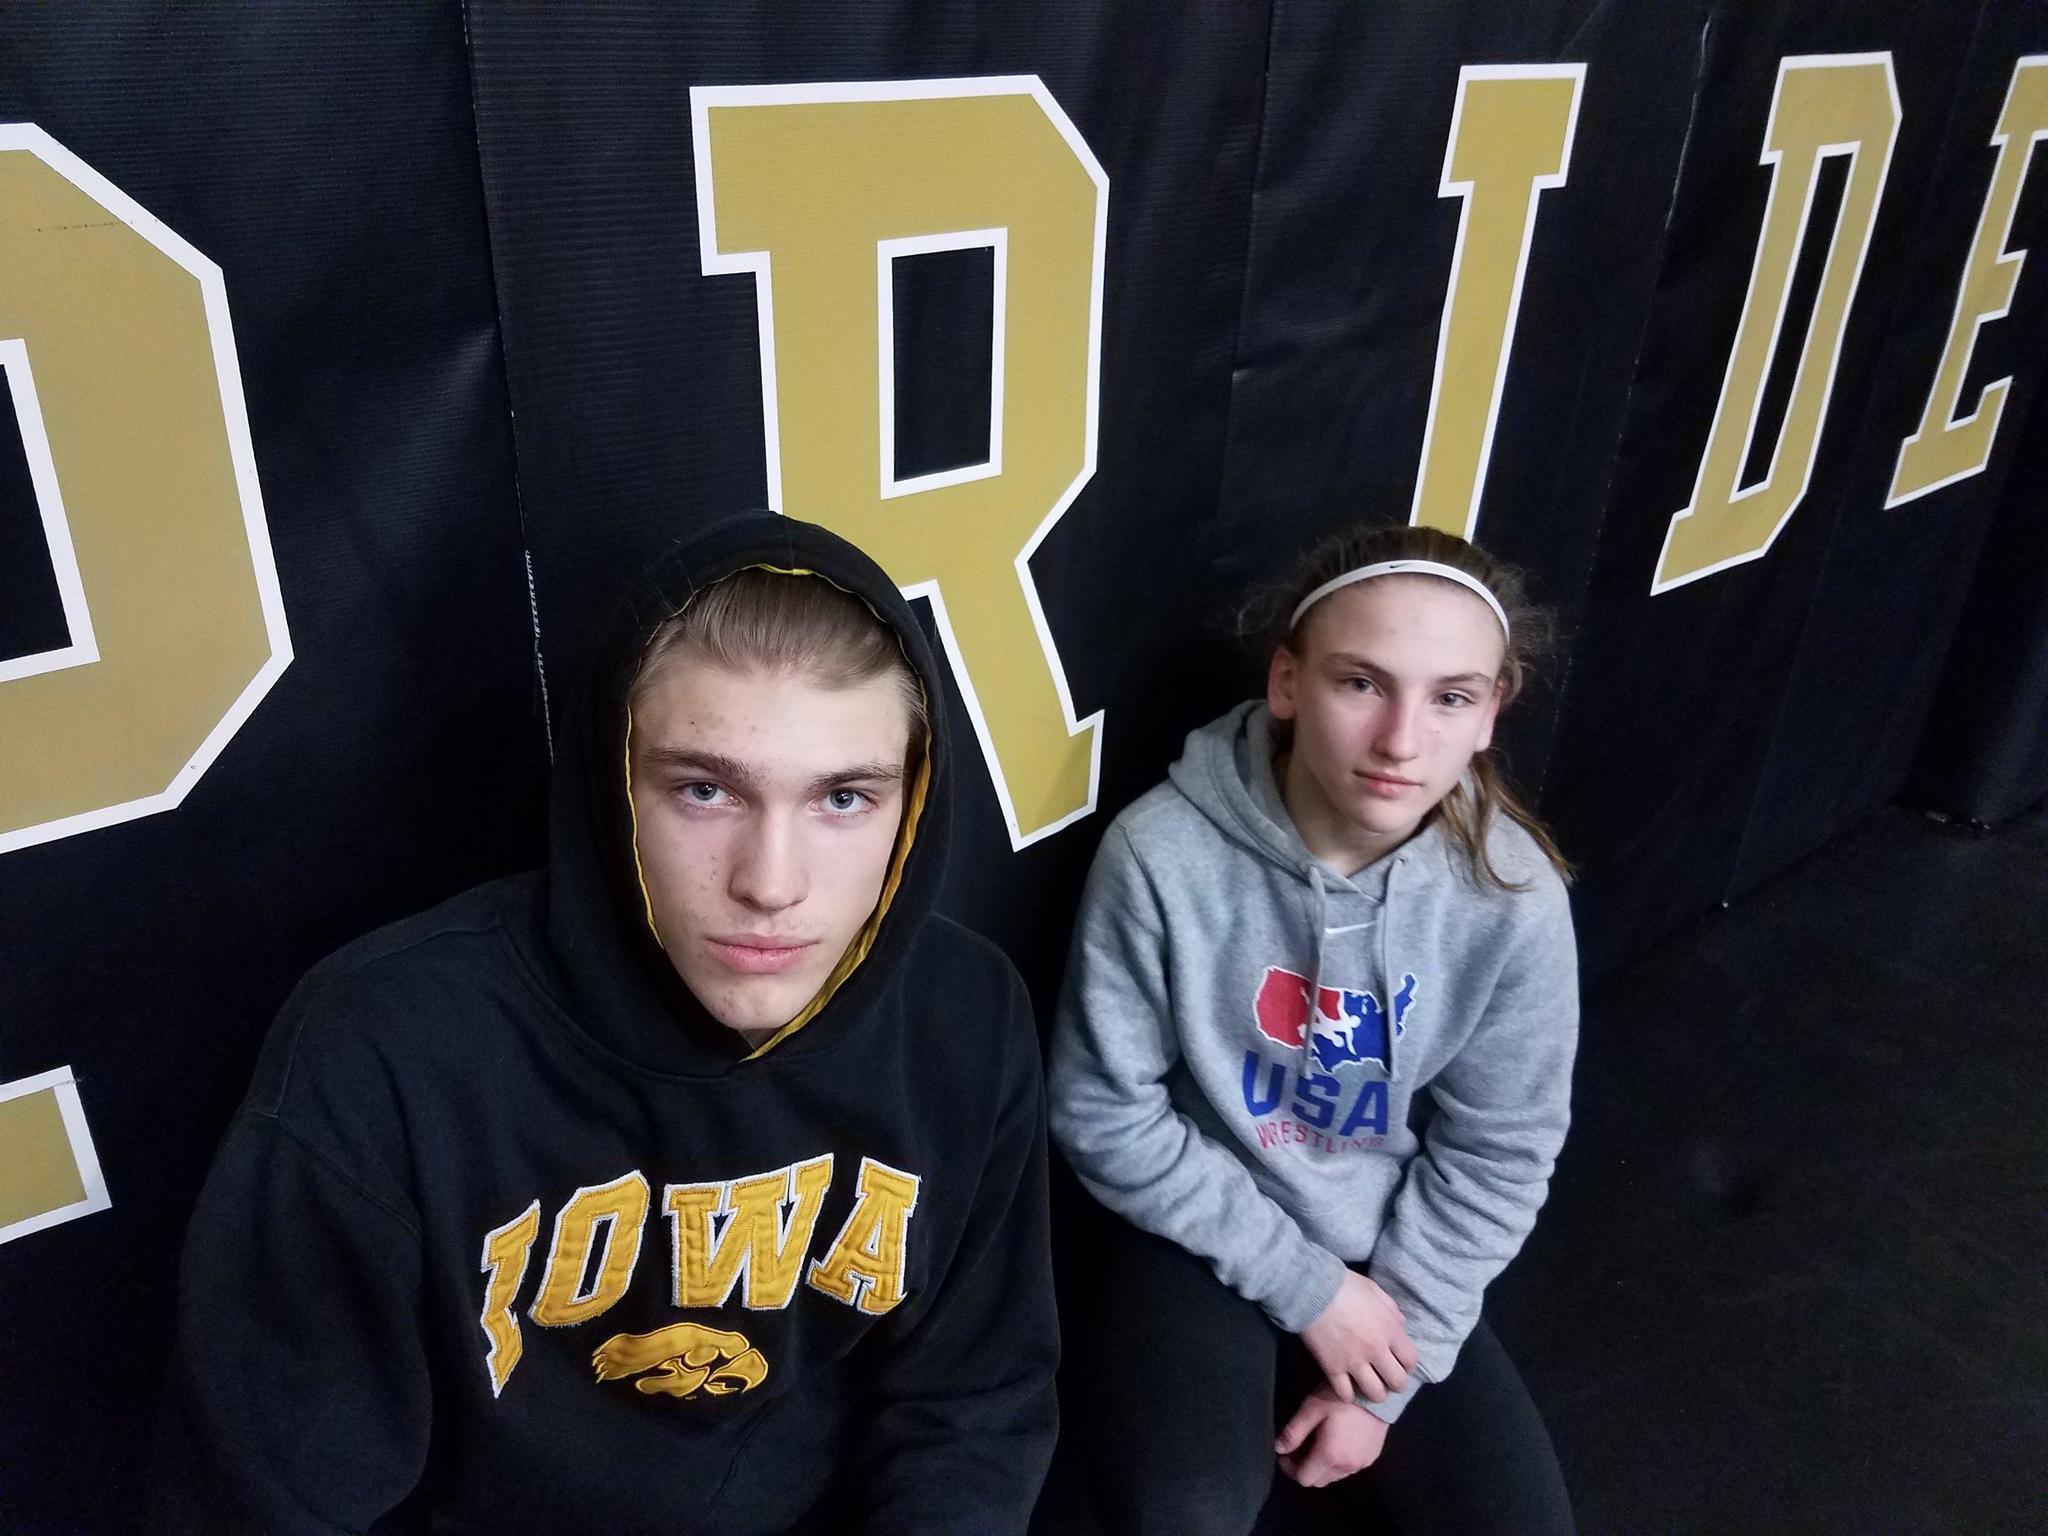 Richards freshman Mia Palumbo becomes first girl ever to win match at IHSA state wrestling meet